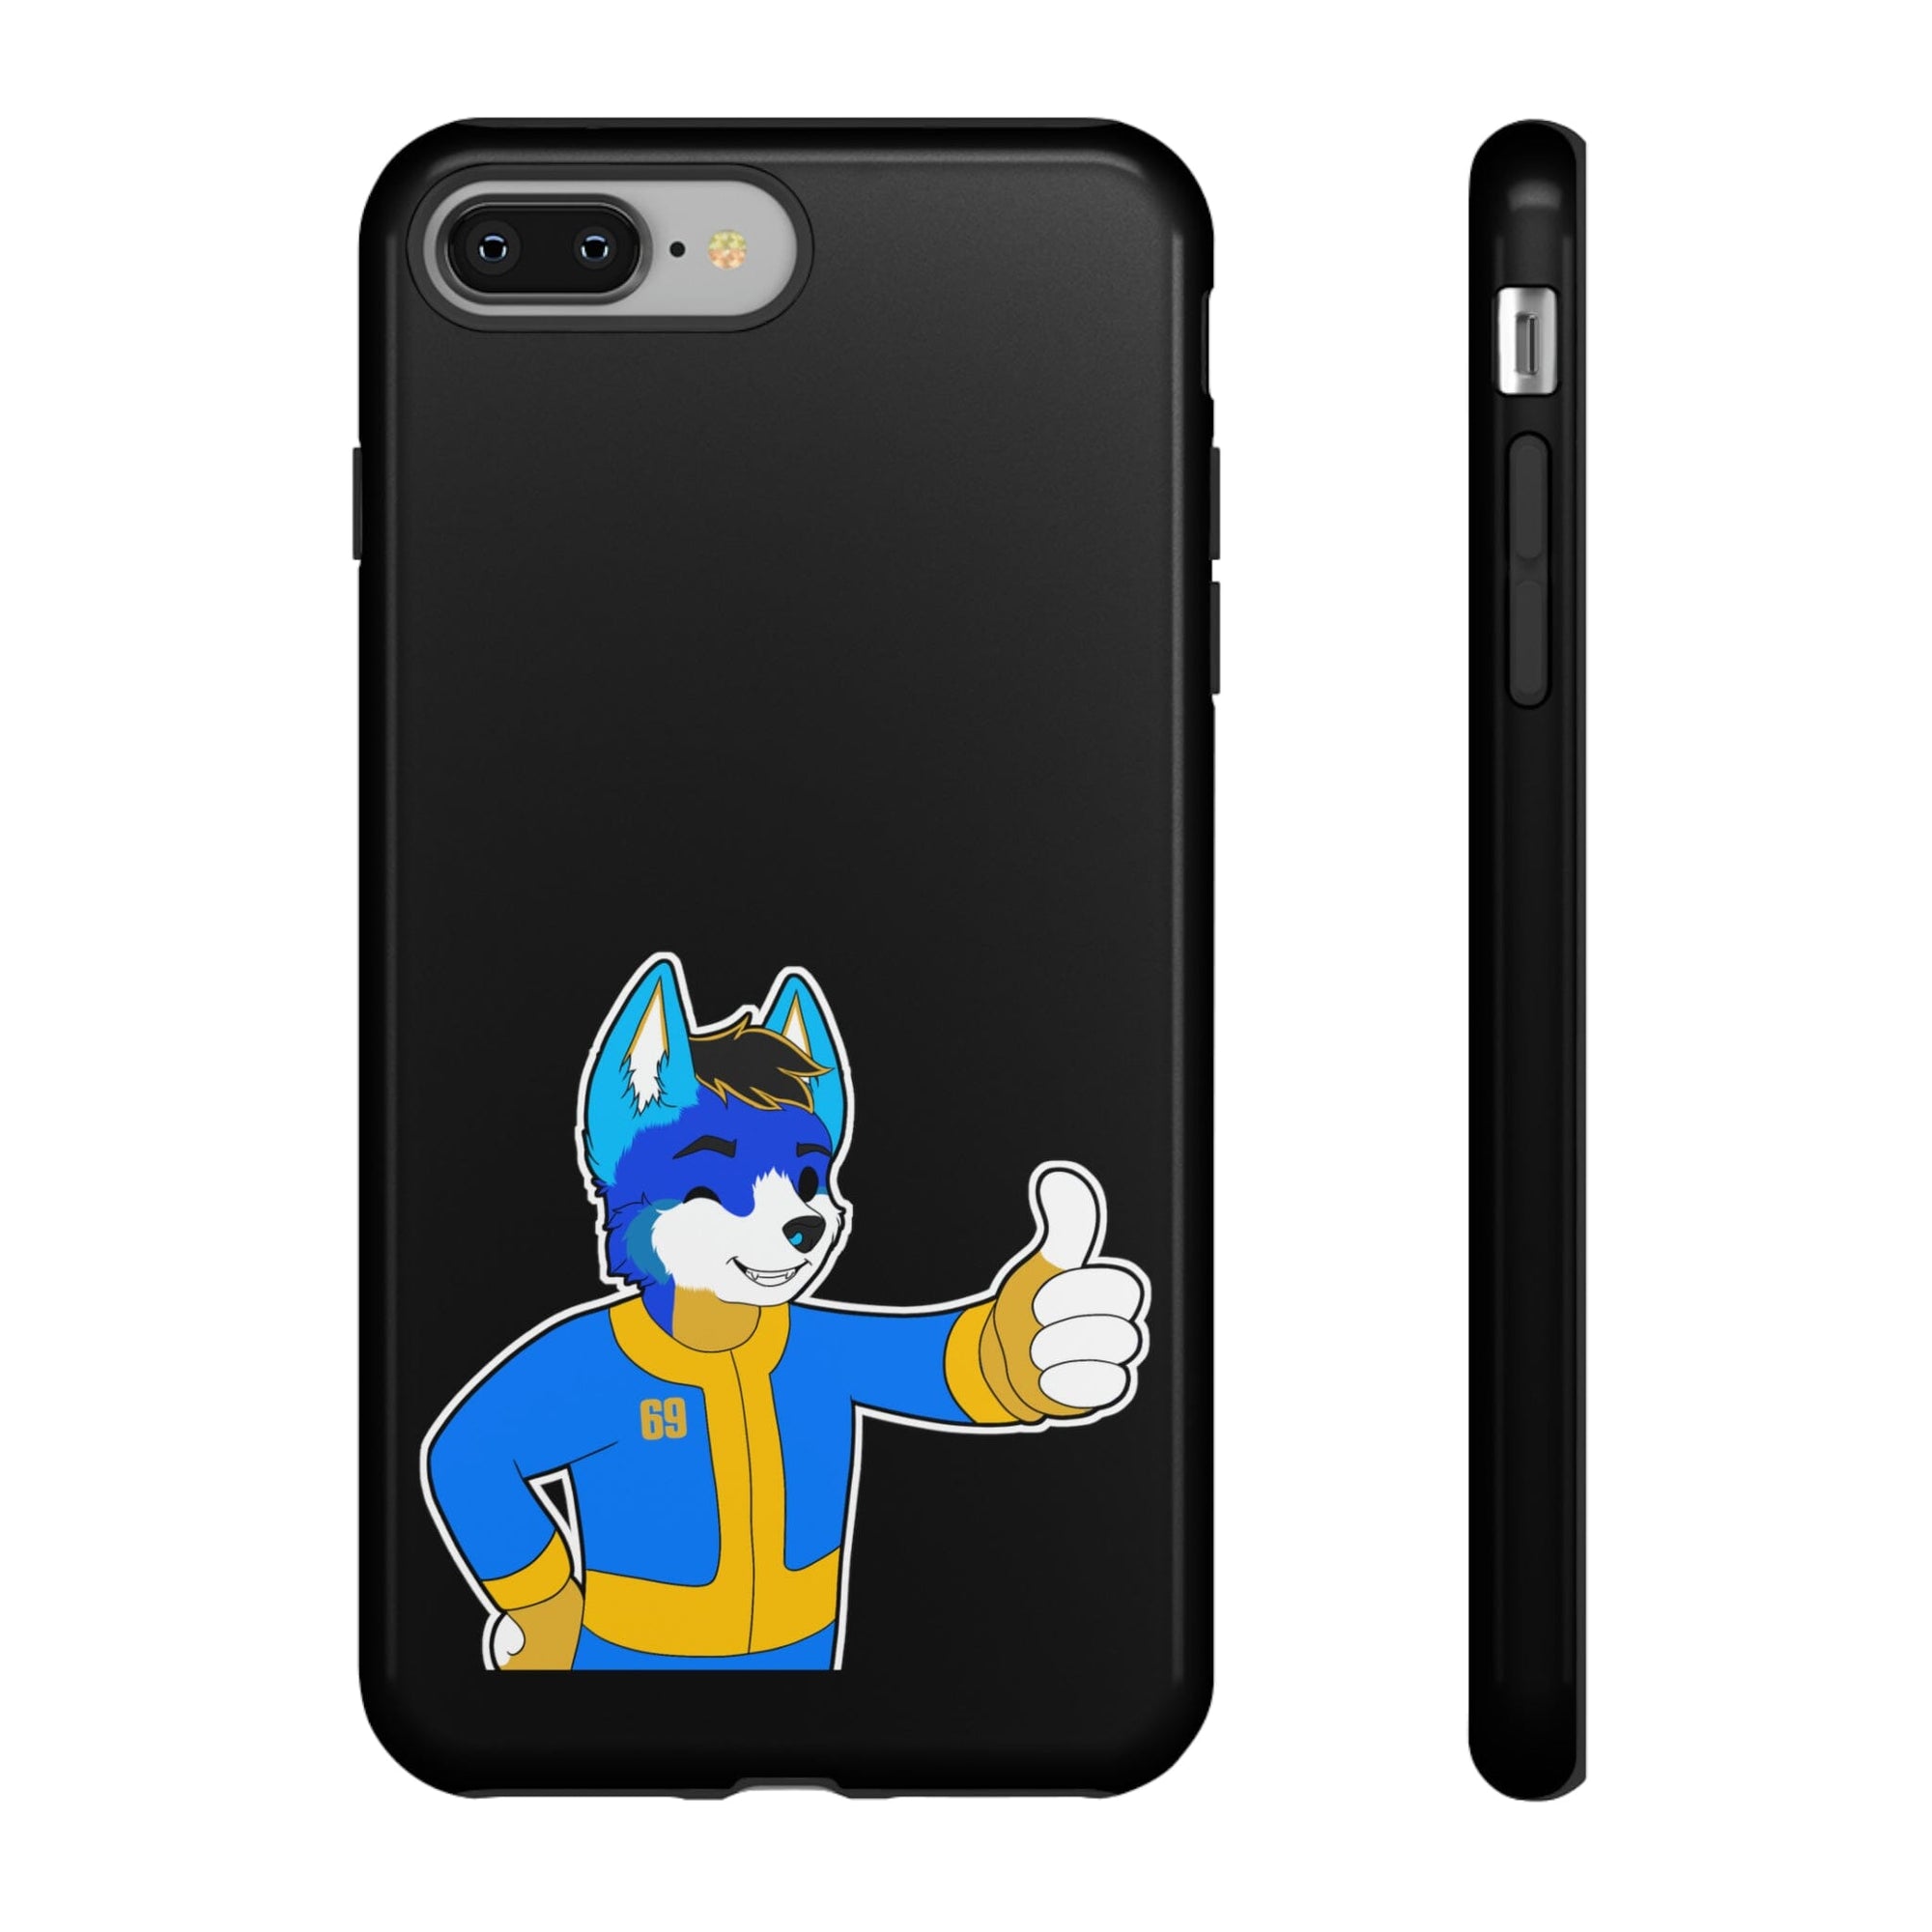 Hund The Hound - Fallout Hund - Phone Case Phone Case AFLT-Hund The Hound Glossy iPhone 8 Plus 